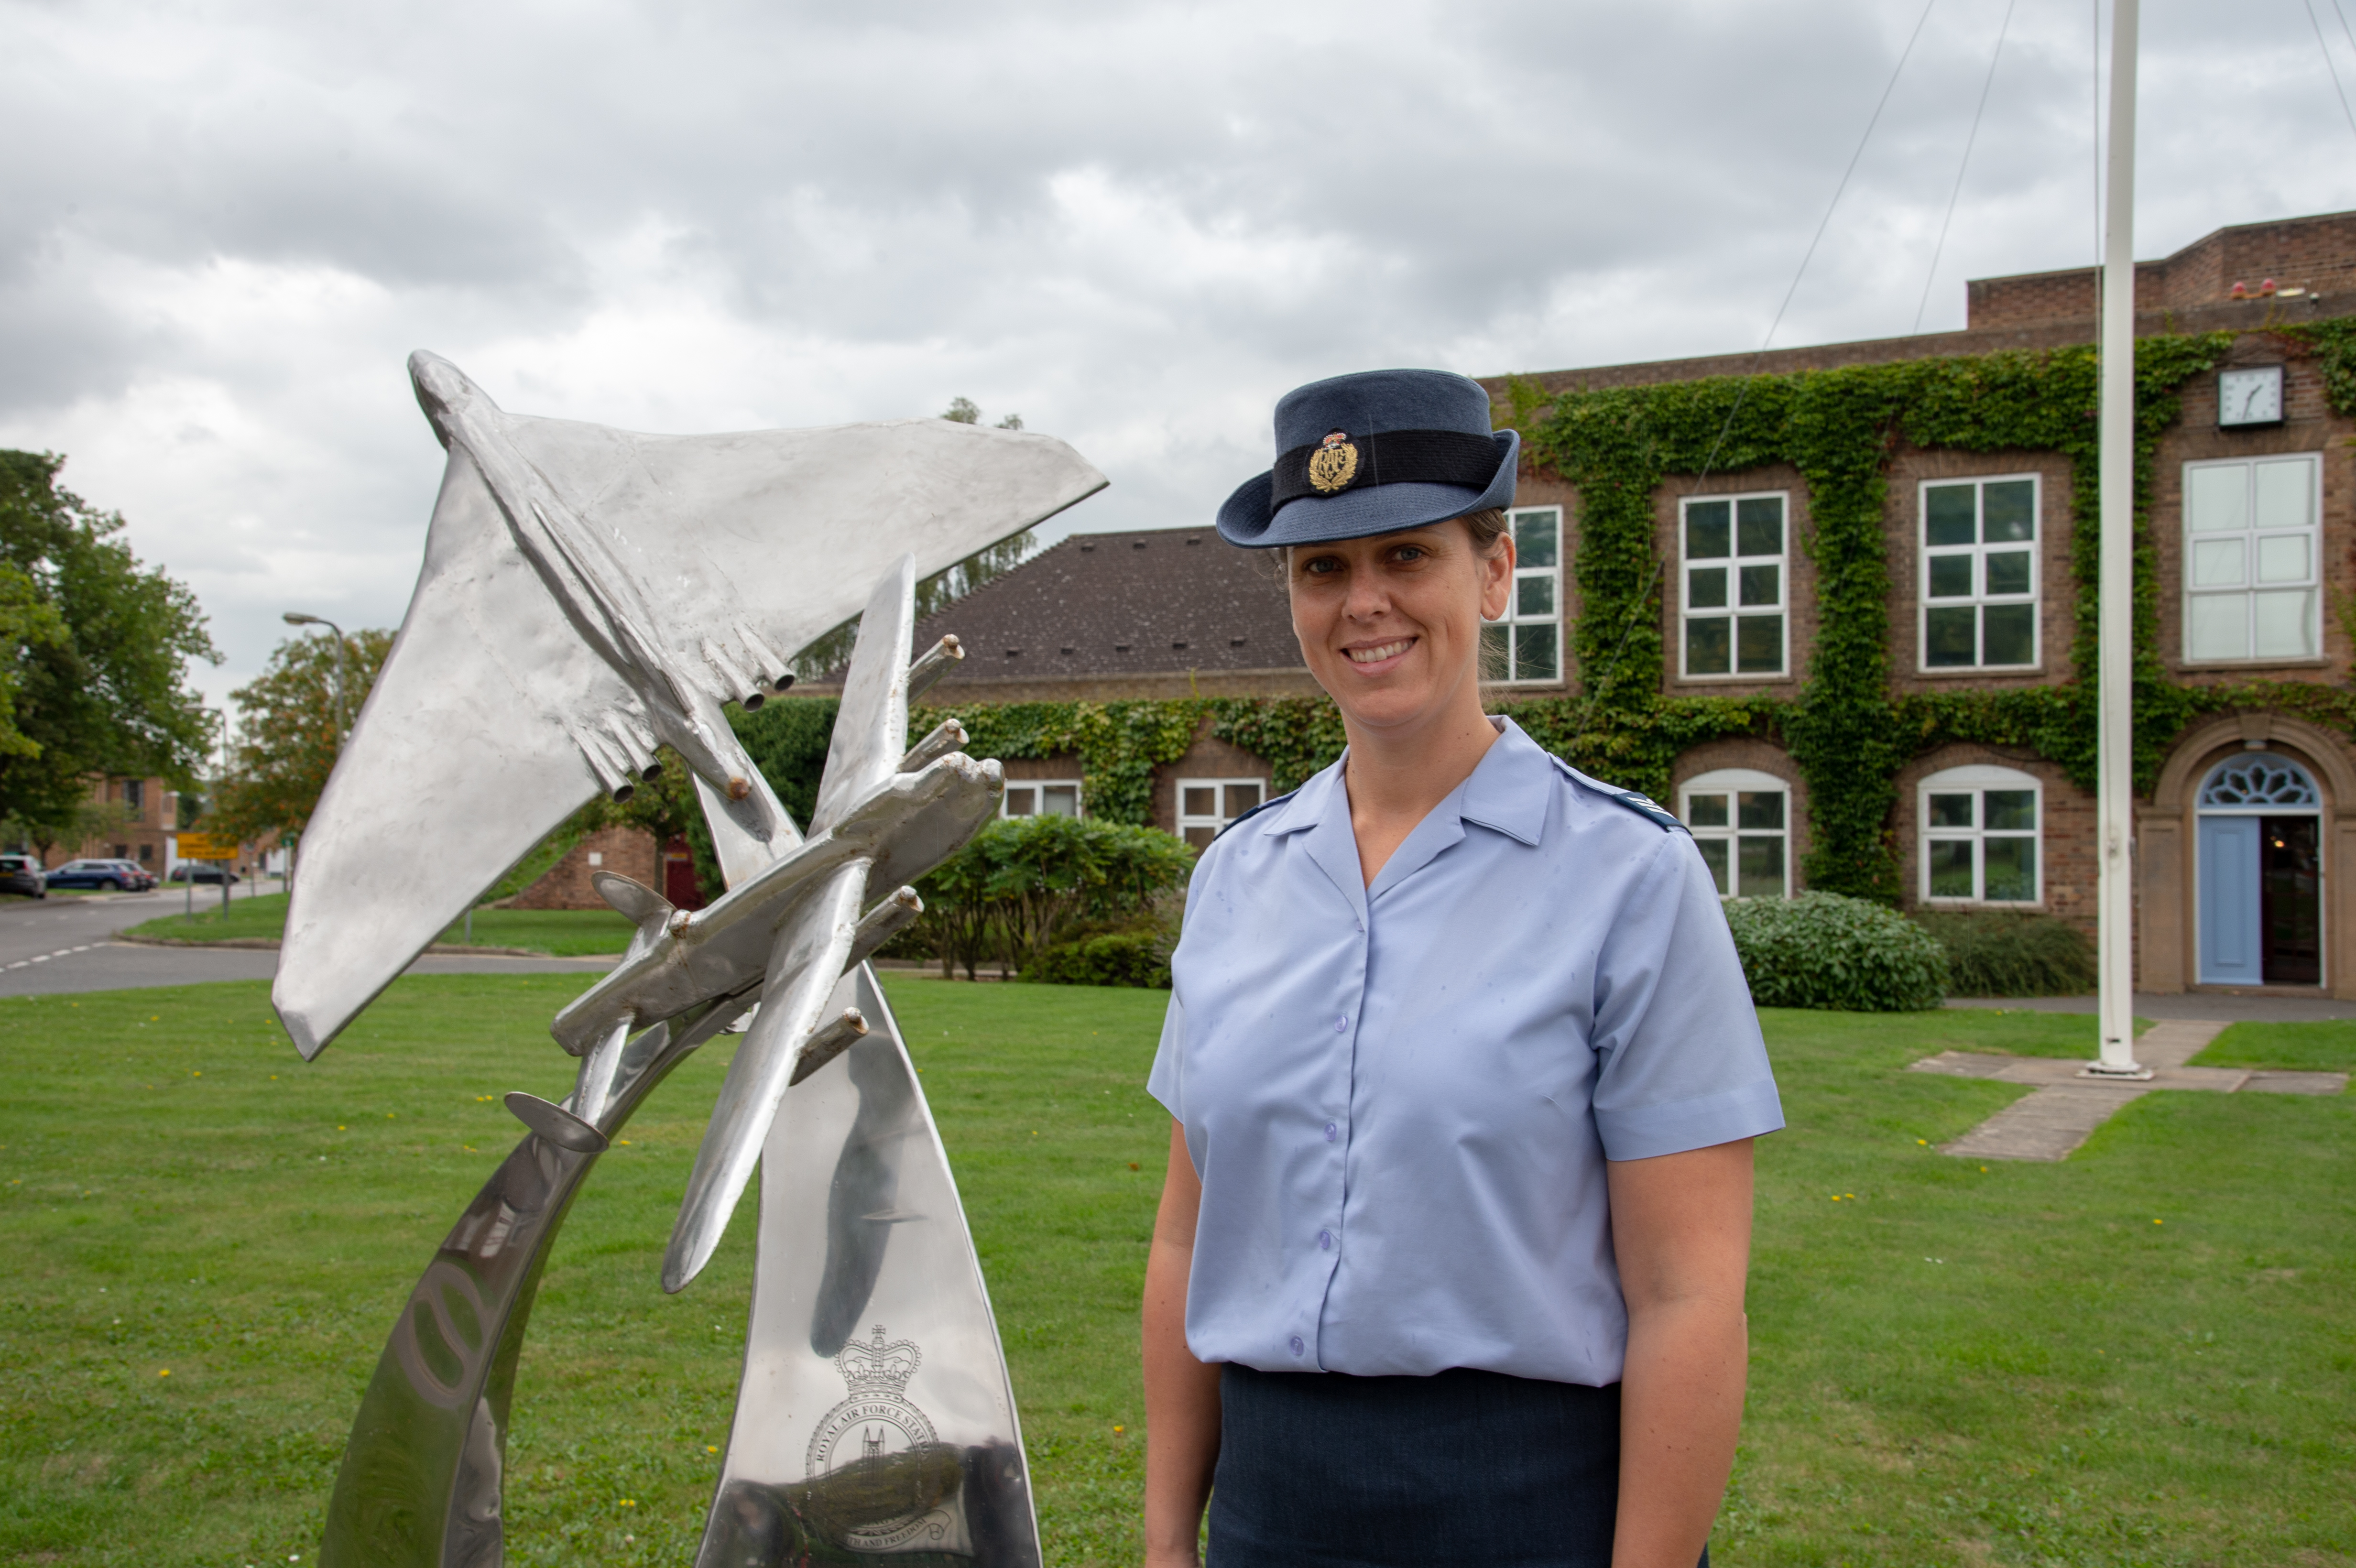 Image shows RAF aviator standing by a metal aircraft statue outside.. 